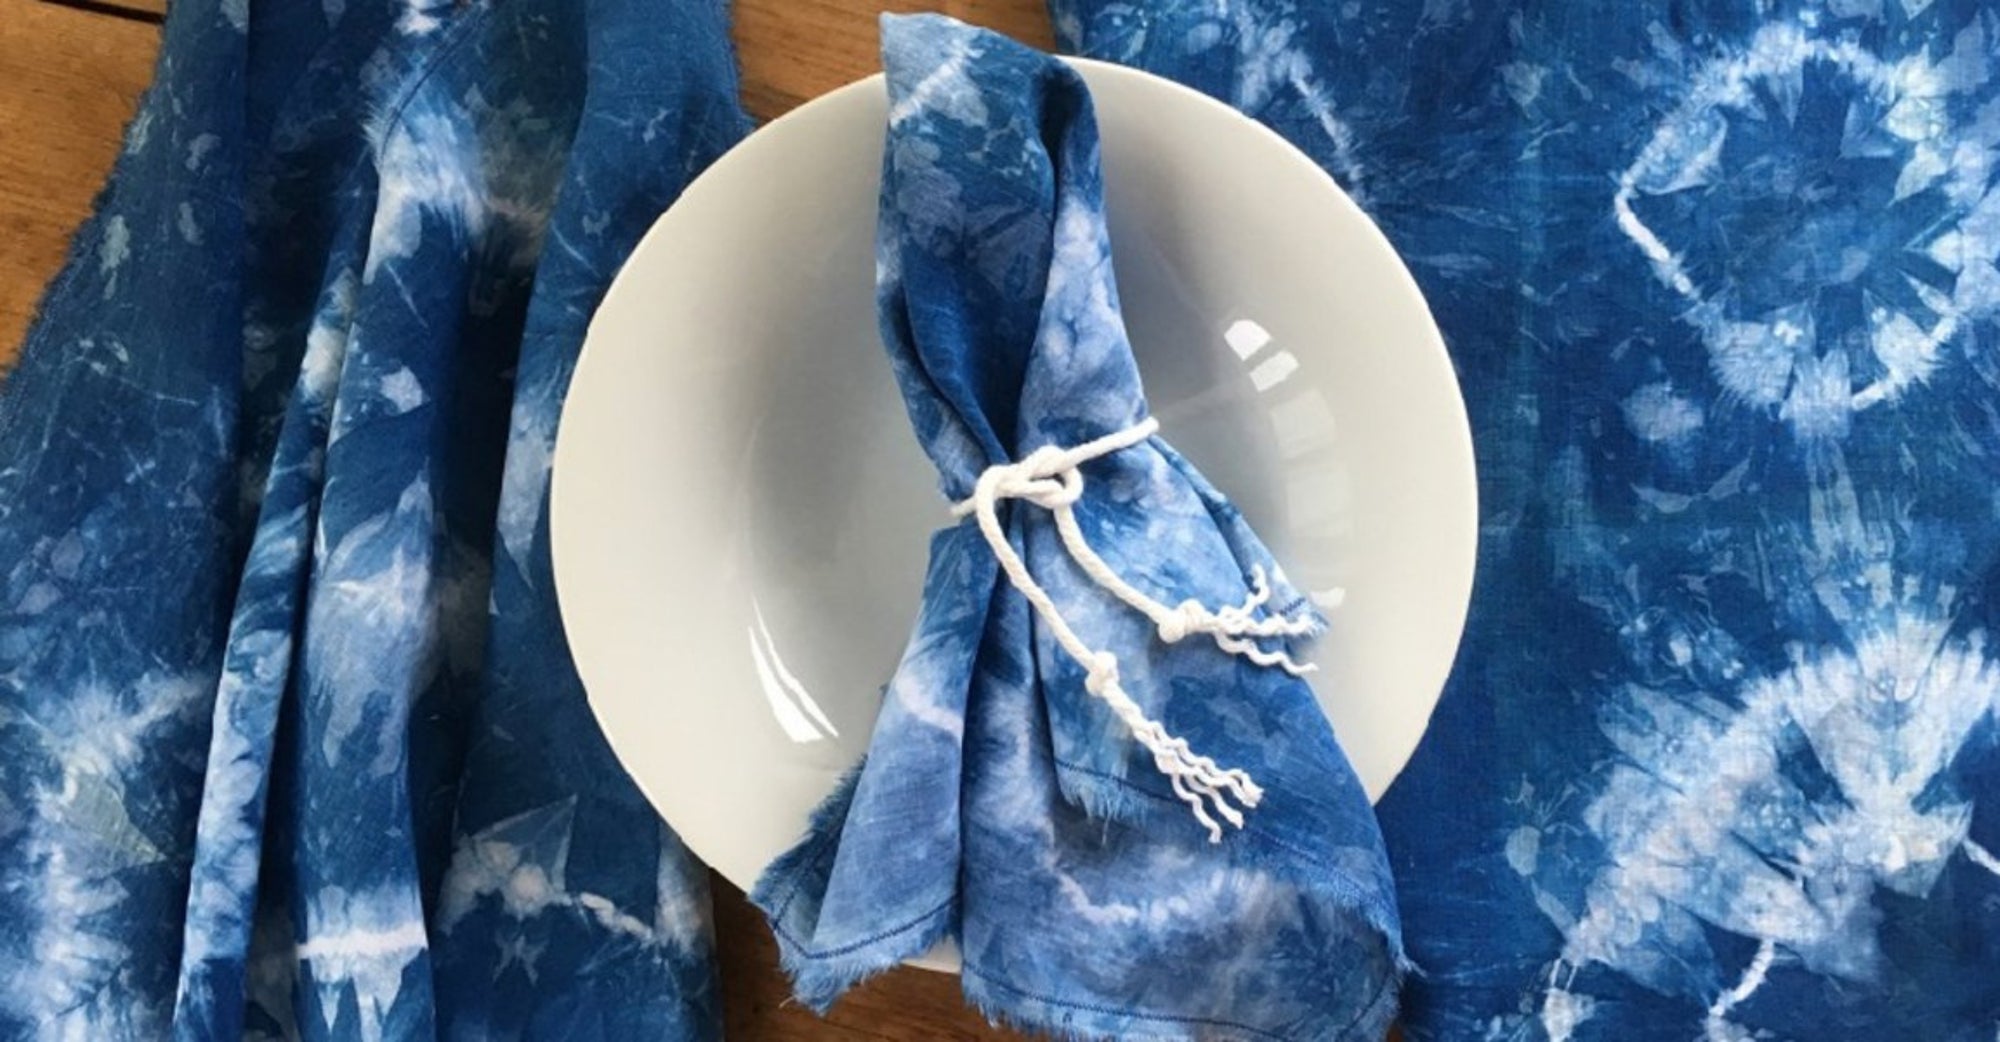 TIE AND DYE | Antares Furnishing | All Products